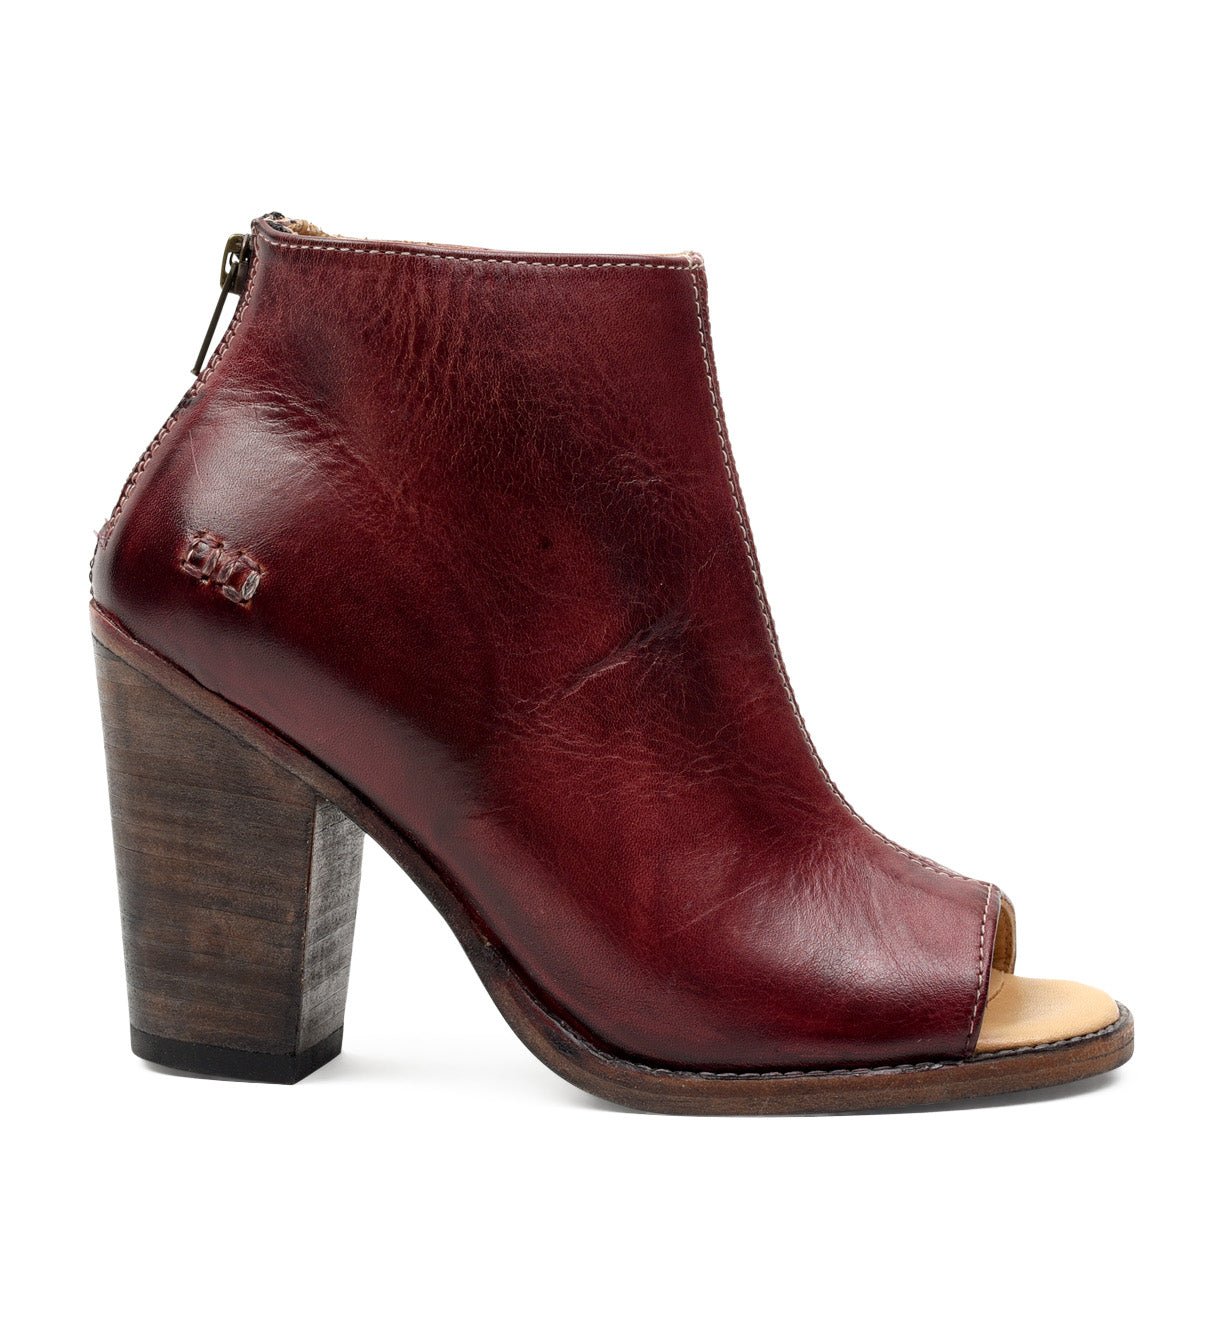 A burgundy leather Onset ankle boot with a wooden heel by Bed Stu.